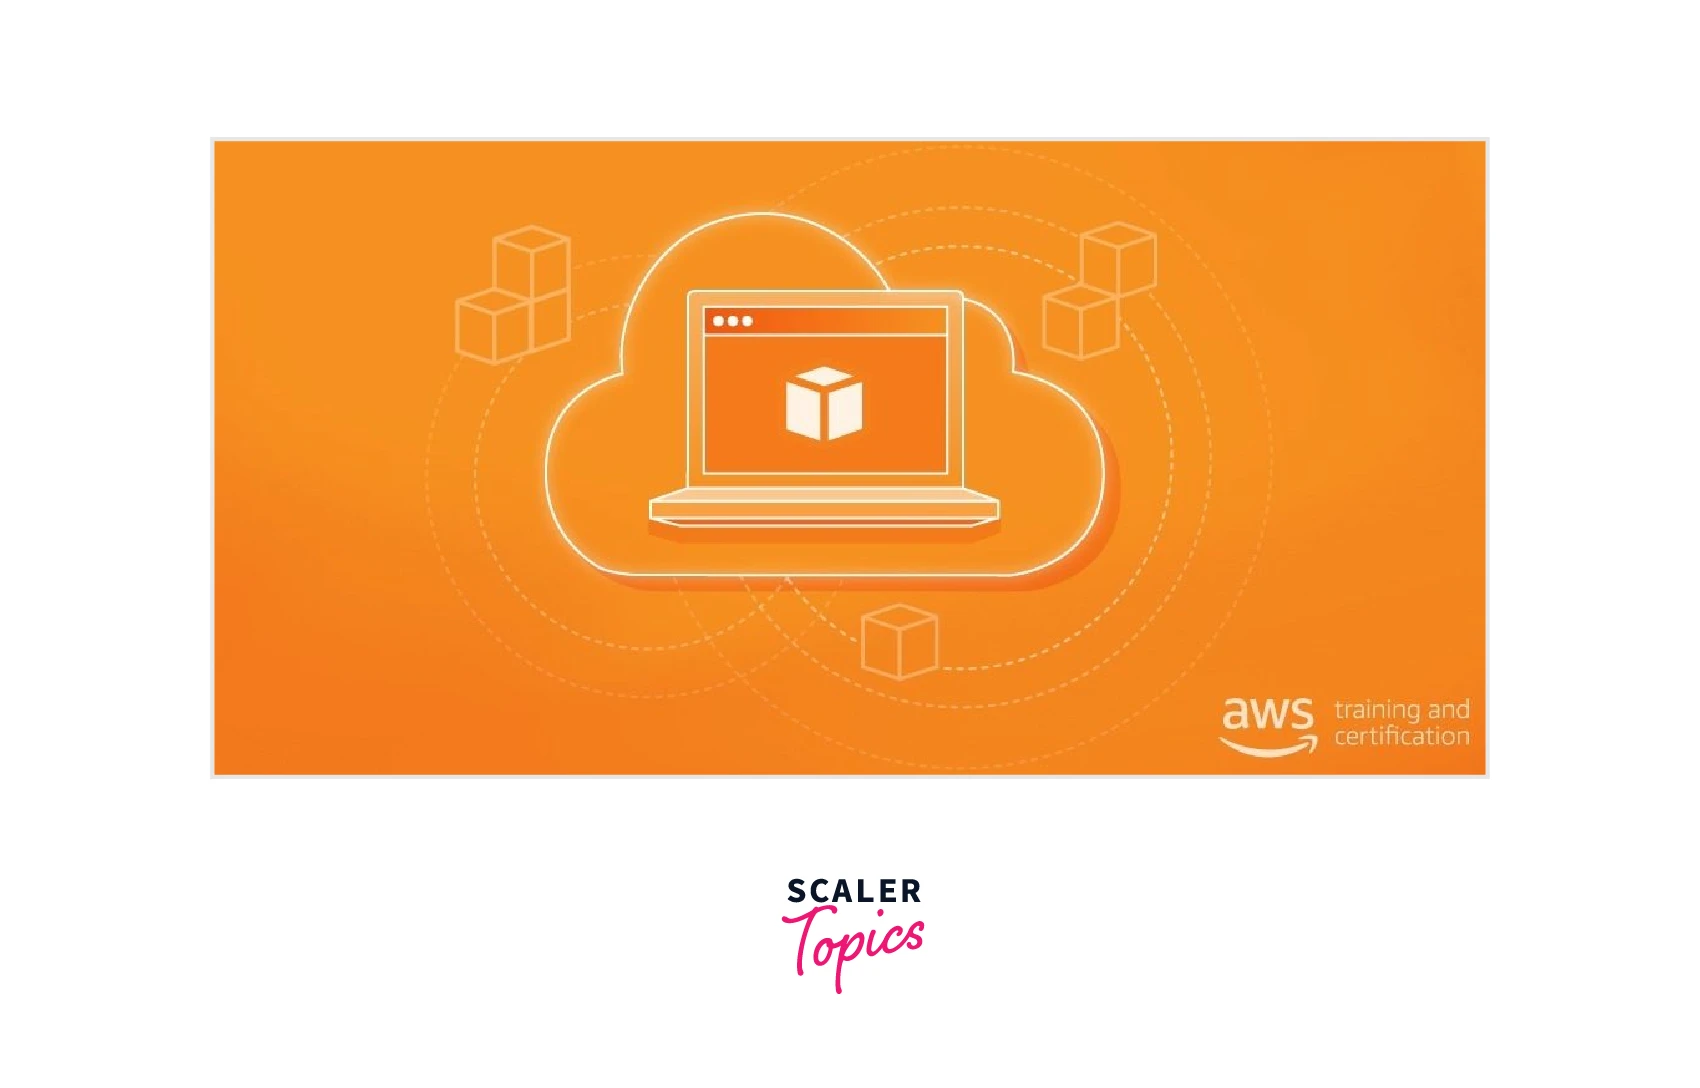 aws-training-and-certification